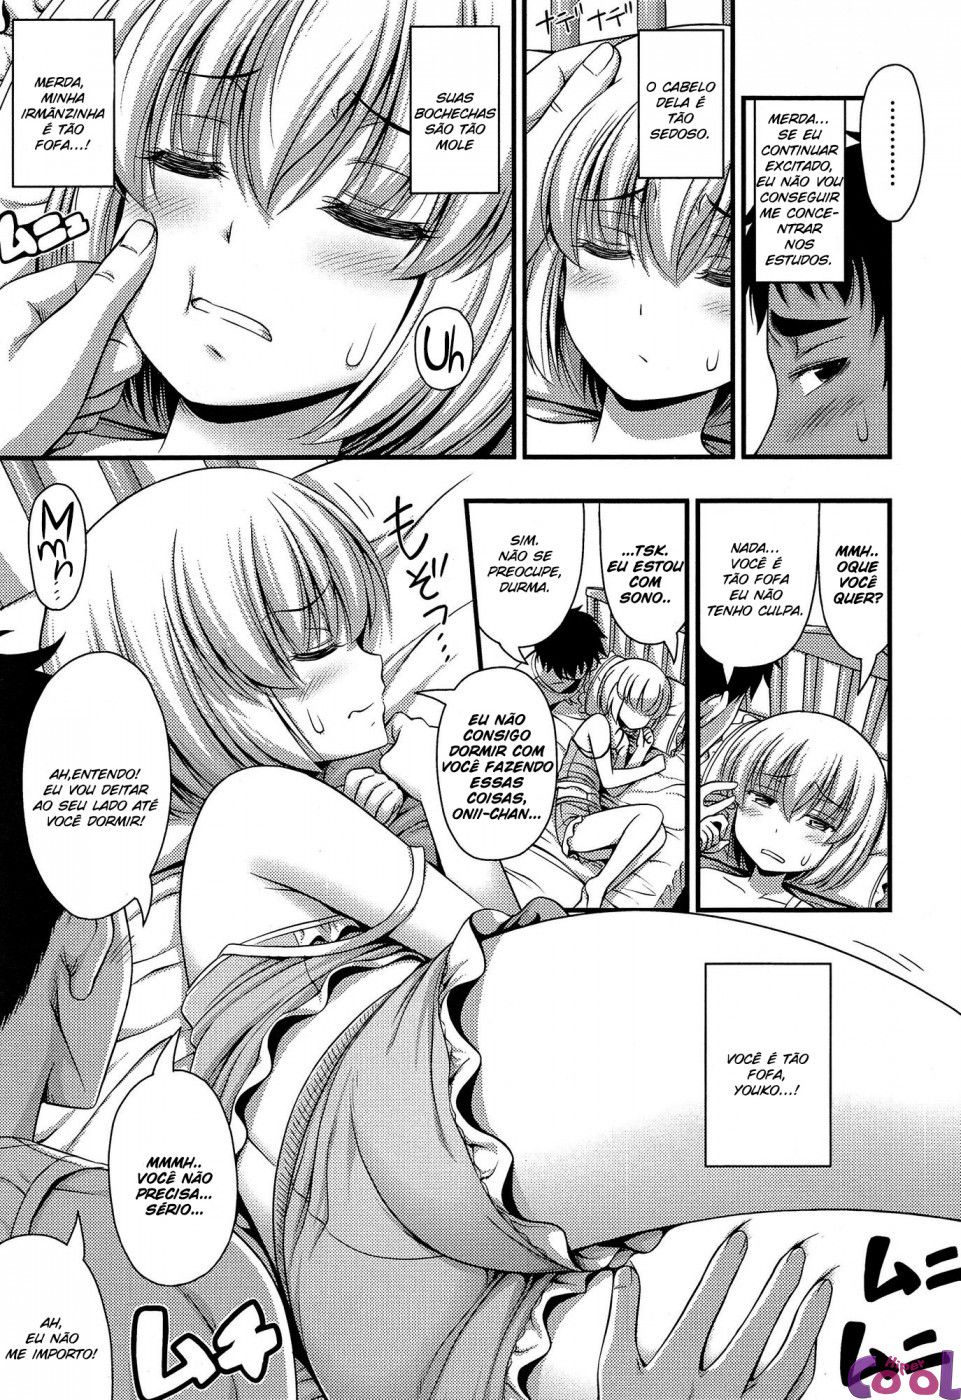 nemui-hime-chapter-01-page-03.jpg